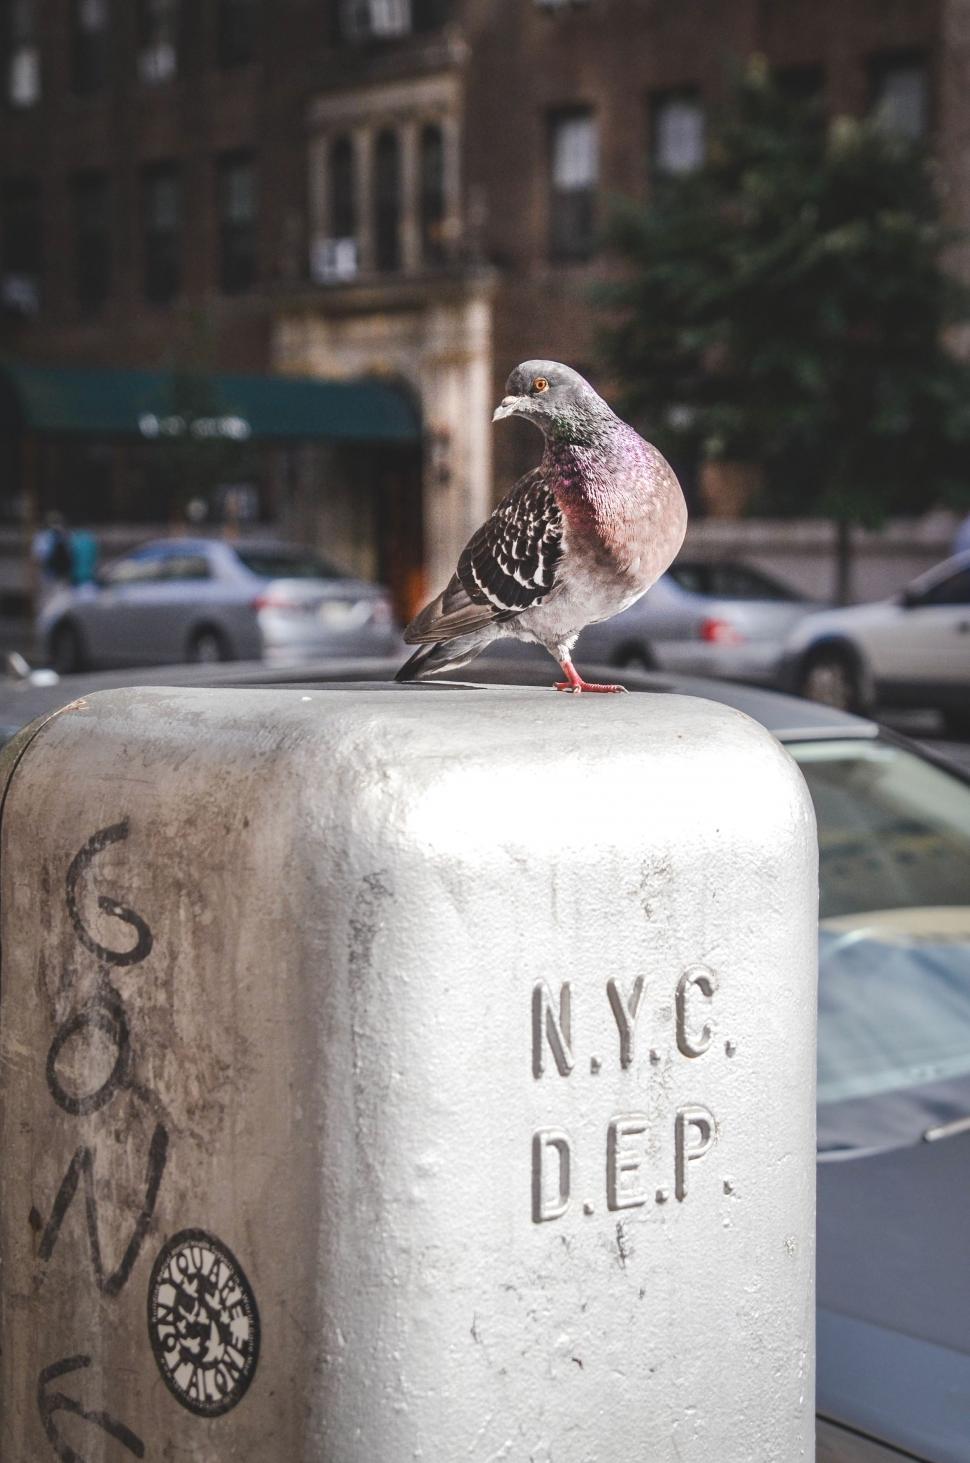 Free Image of Small Bird Perched on Top of Metal Box 